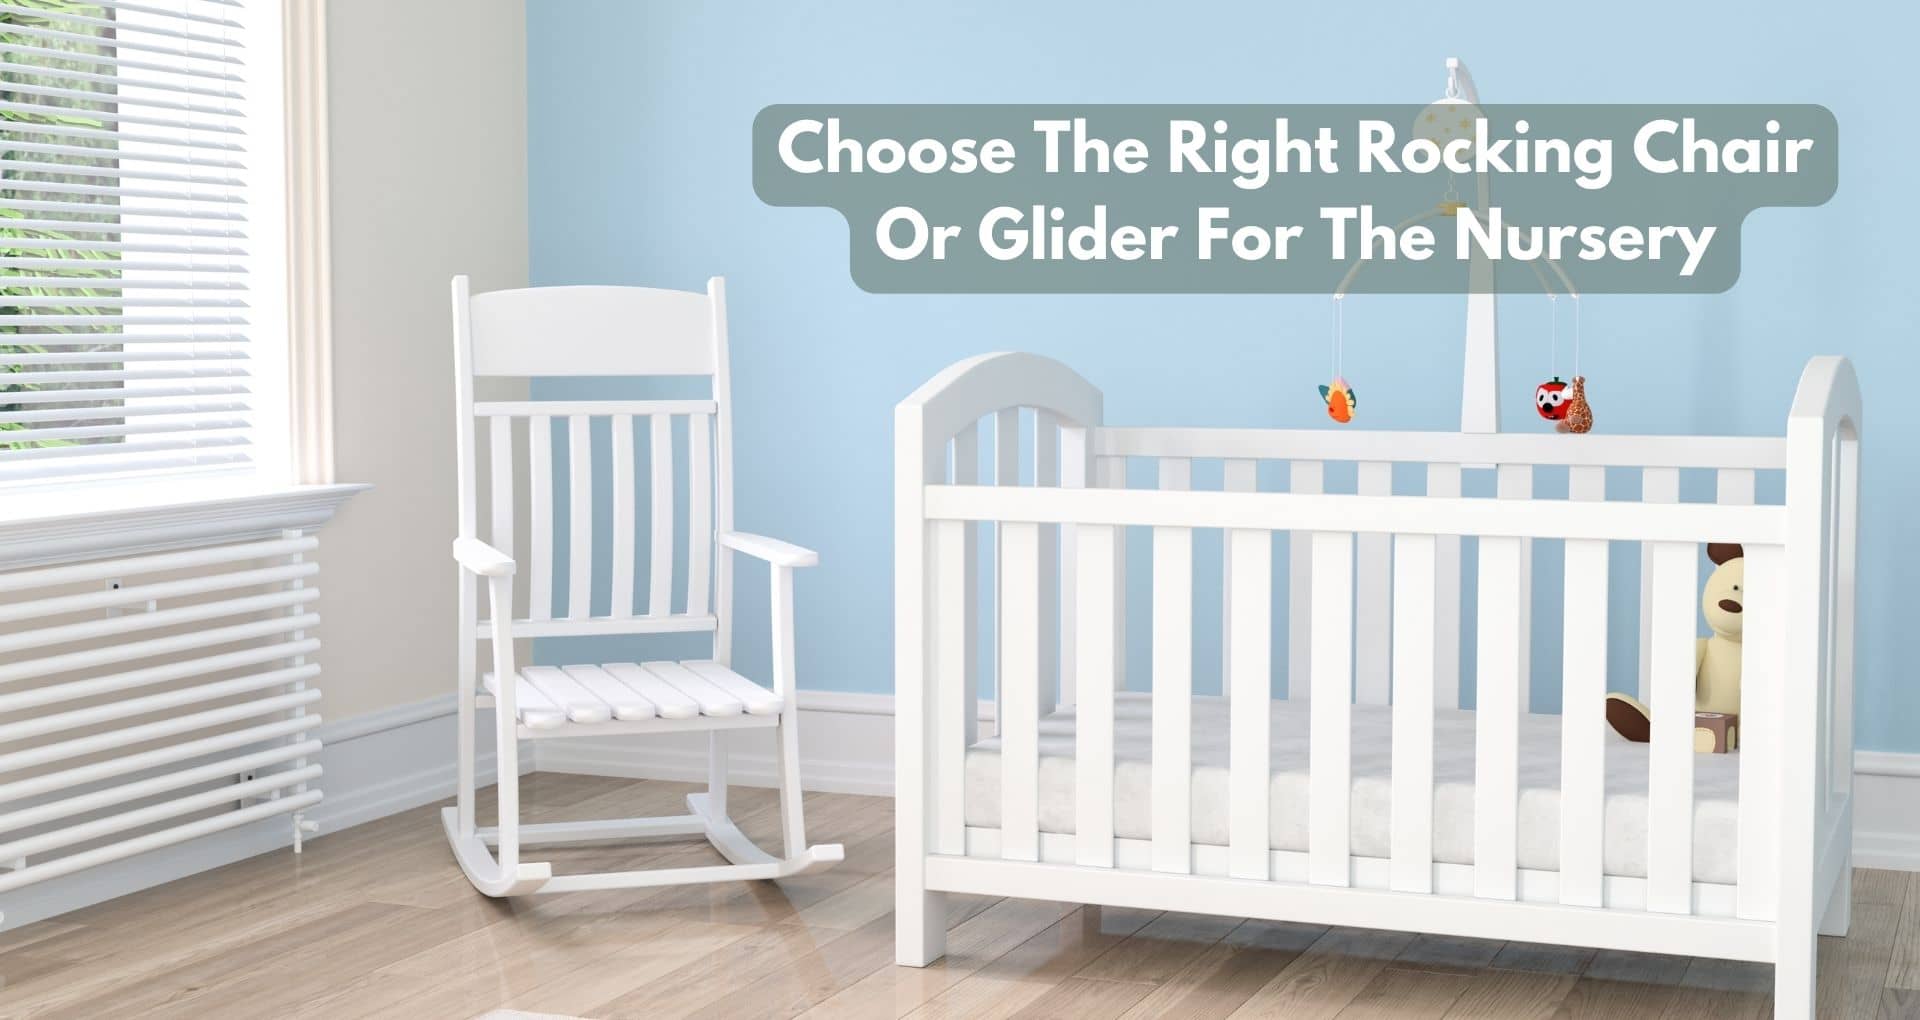 How Do I Choose The Right Rocking Chair Or Glider For The Nursery?